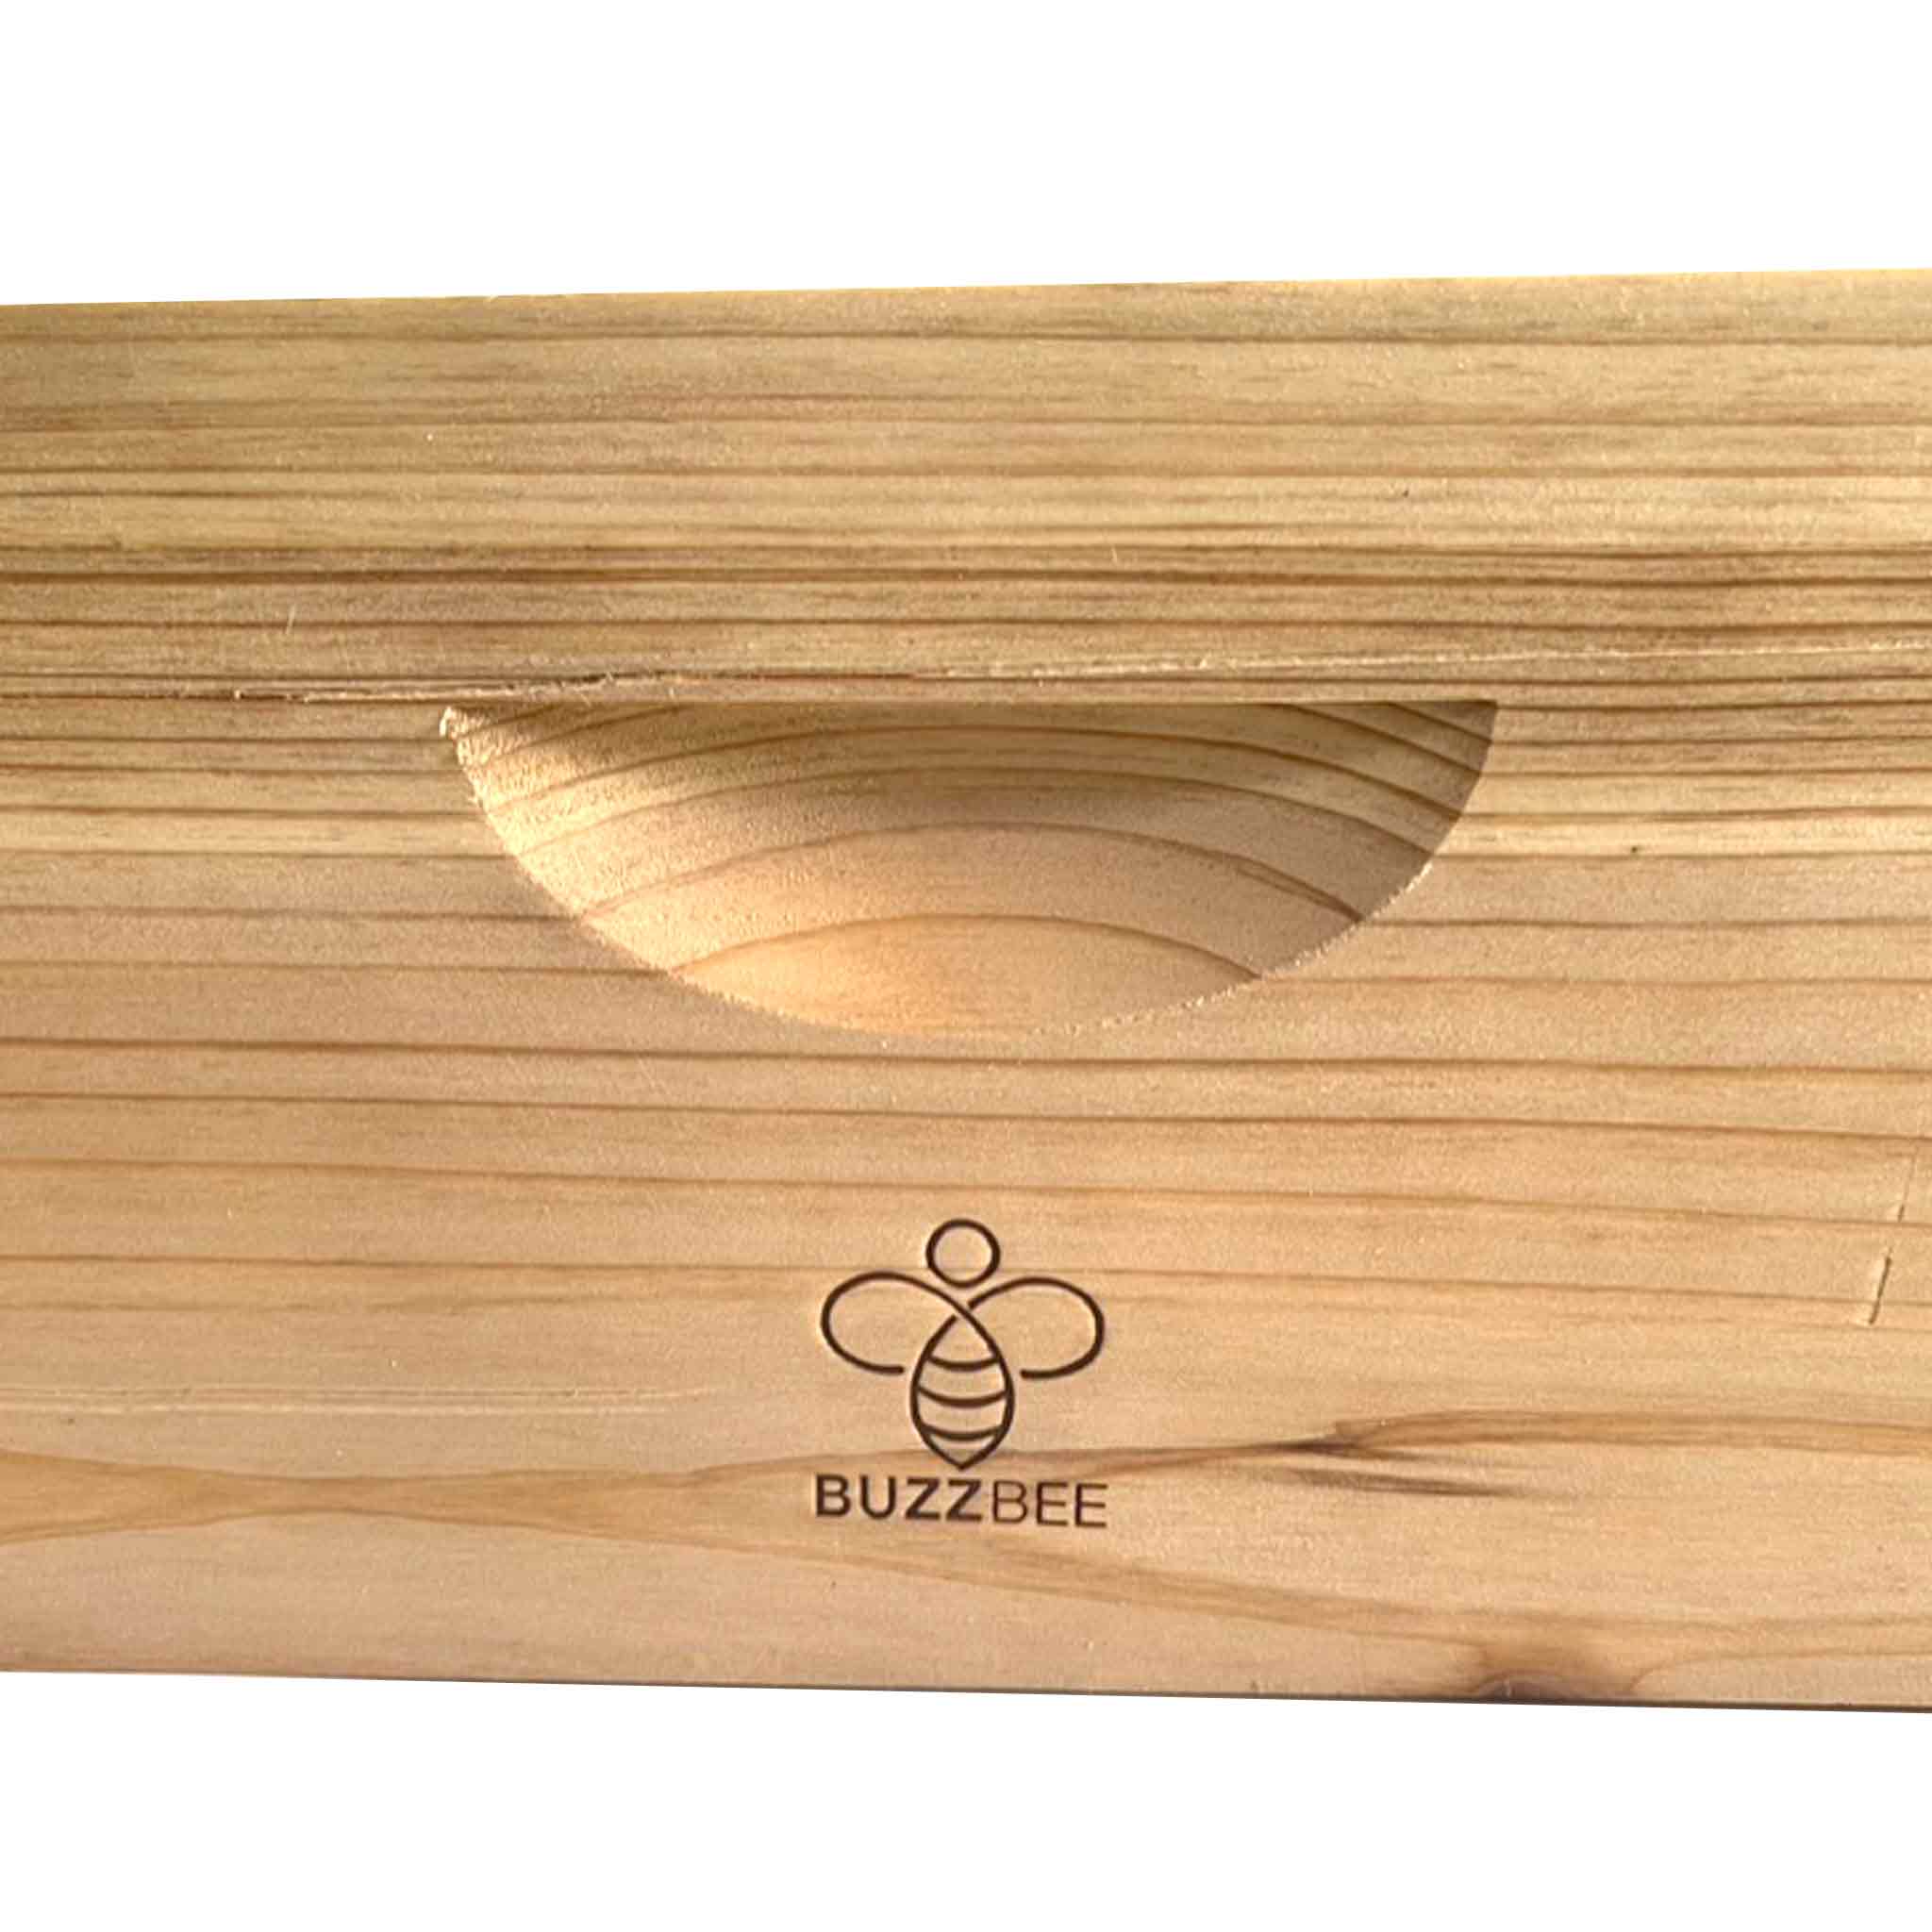 Commercial Hot Wax Dipped, Buzzbee Ideal Sized Fir Super for Flow and Langstroth Beehives - Hive Parts collection by Buzzbee Beekeeping Supplies